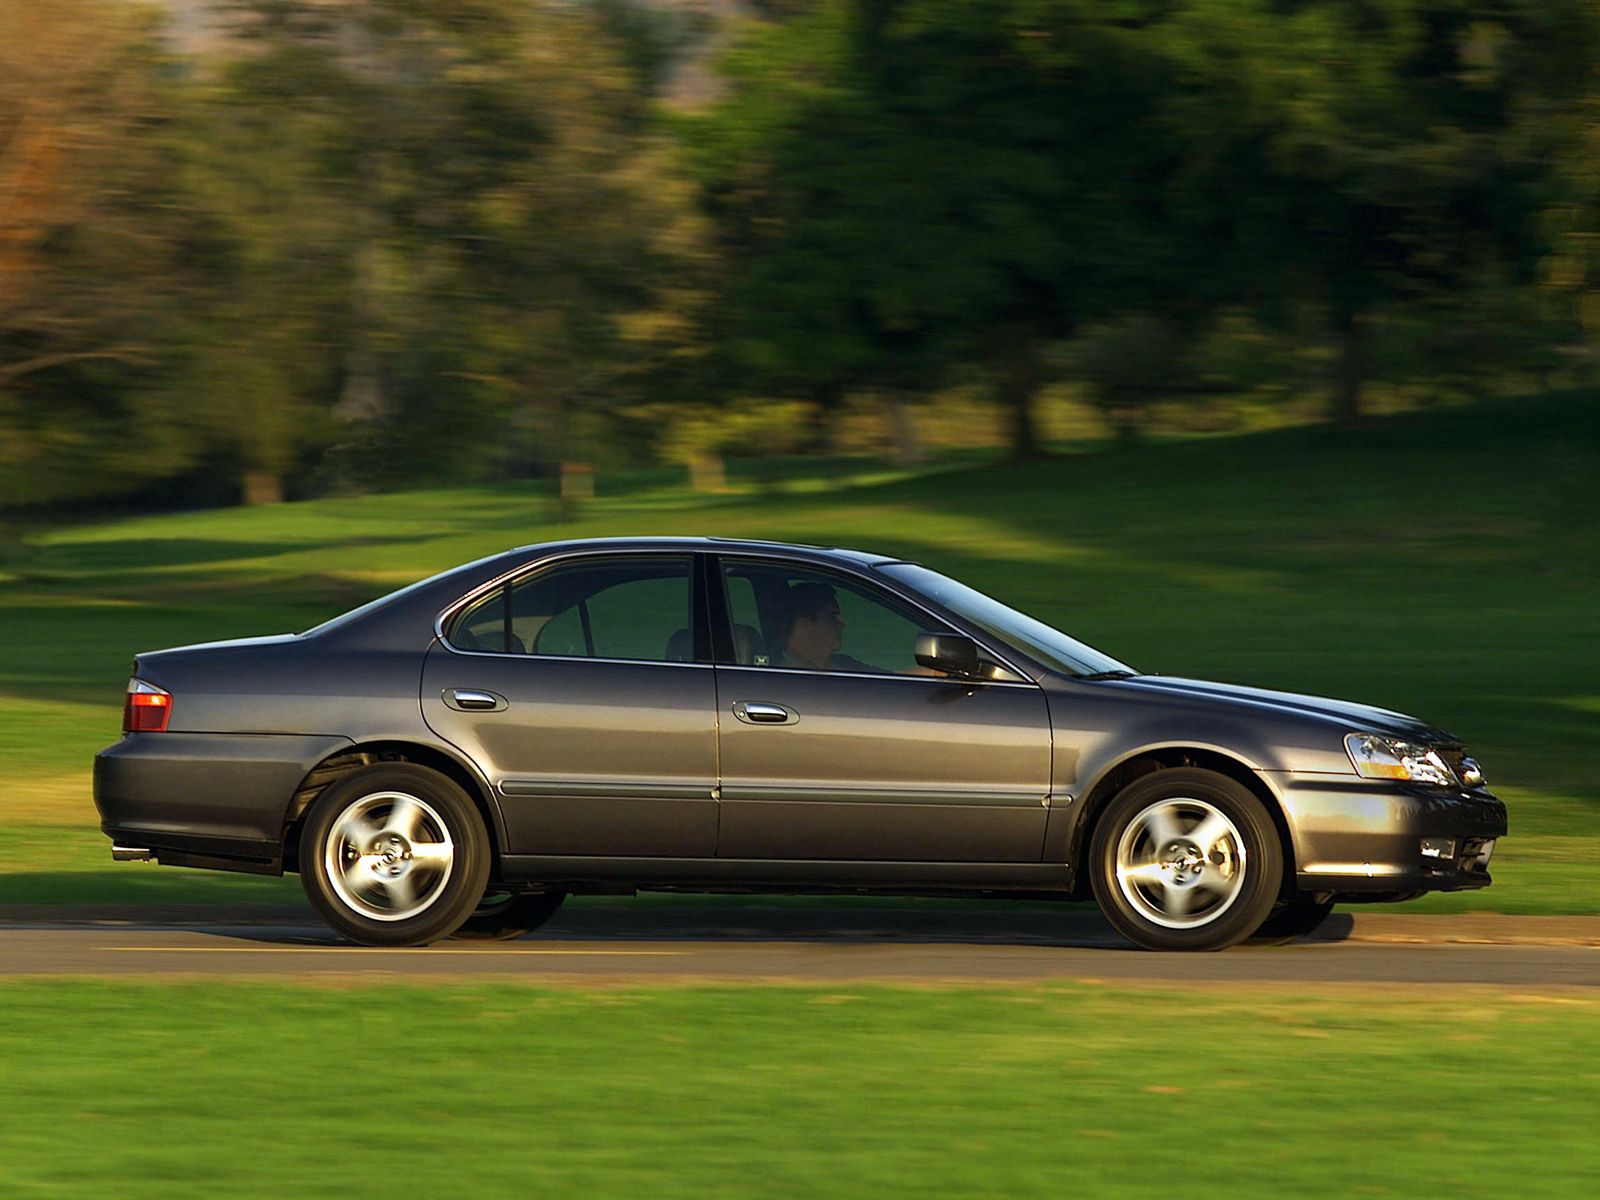 HD wallpaper auto, nature, trees, grass, acura, cars, blue, side view, speed, style, akura, tl, 2002